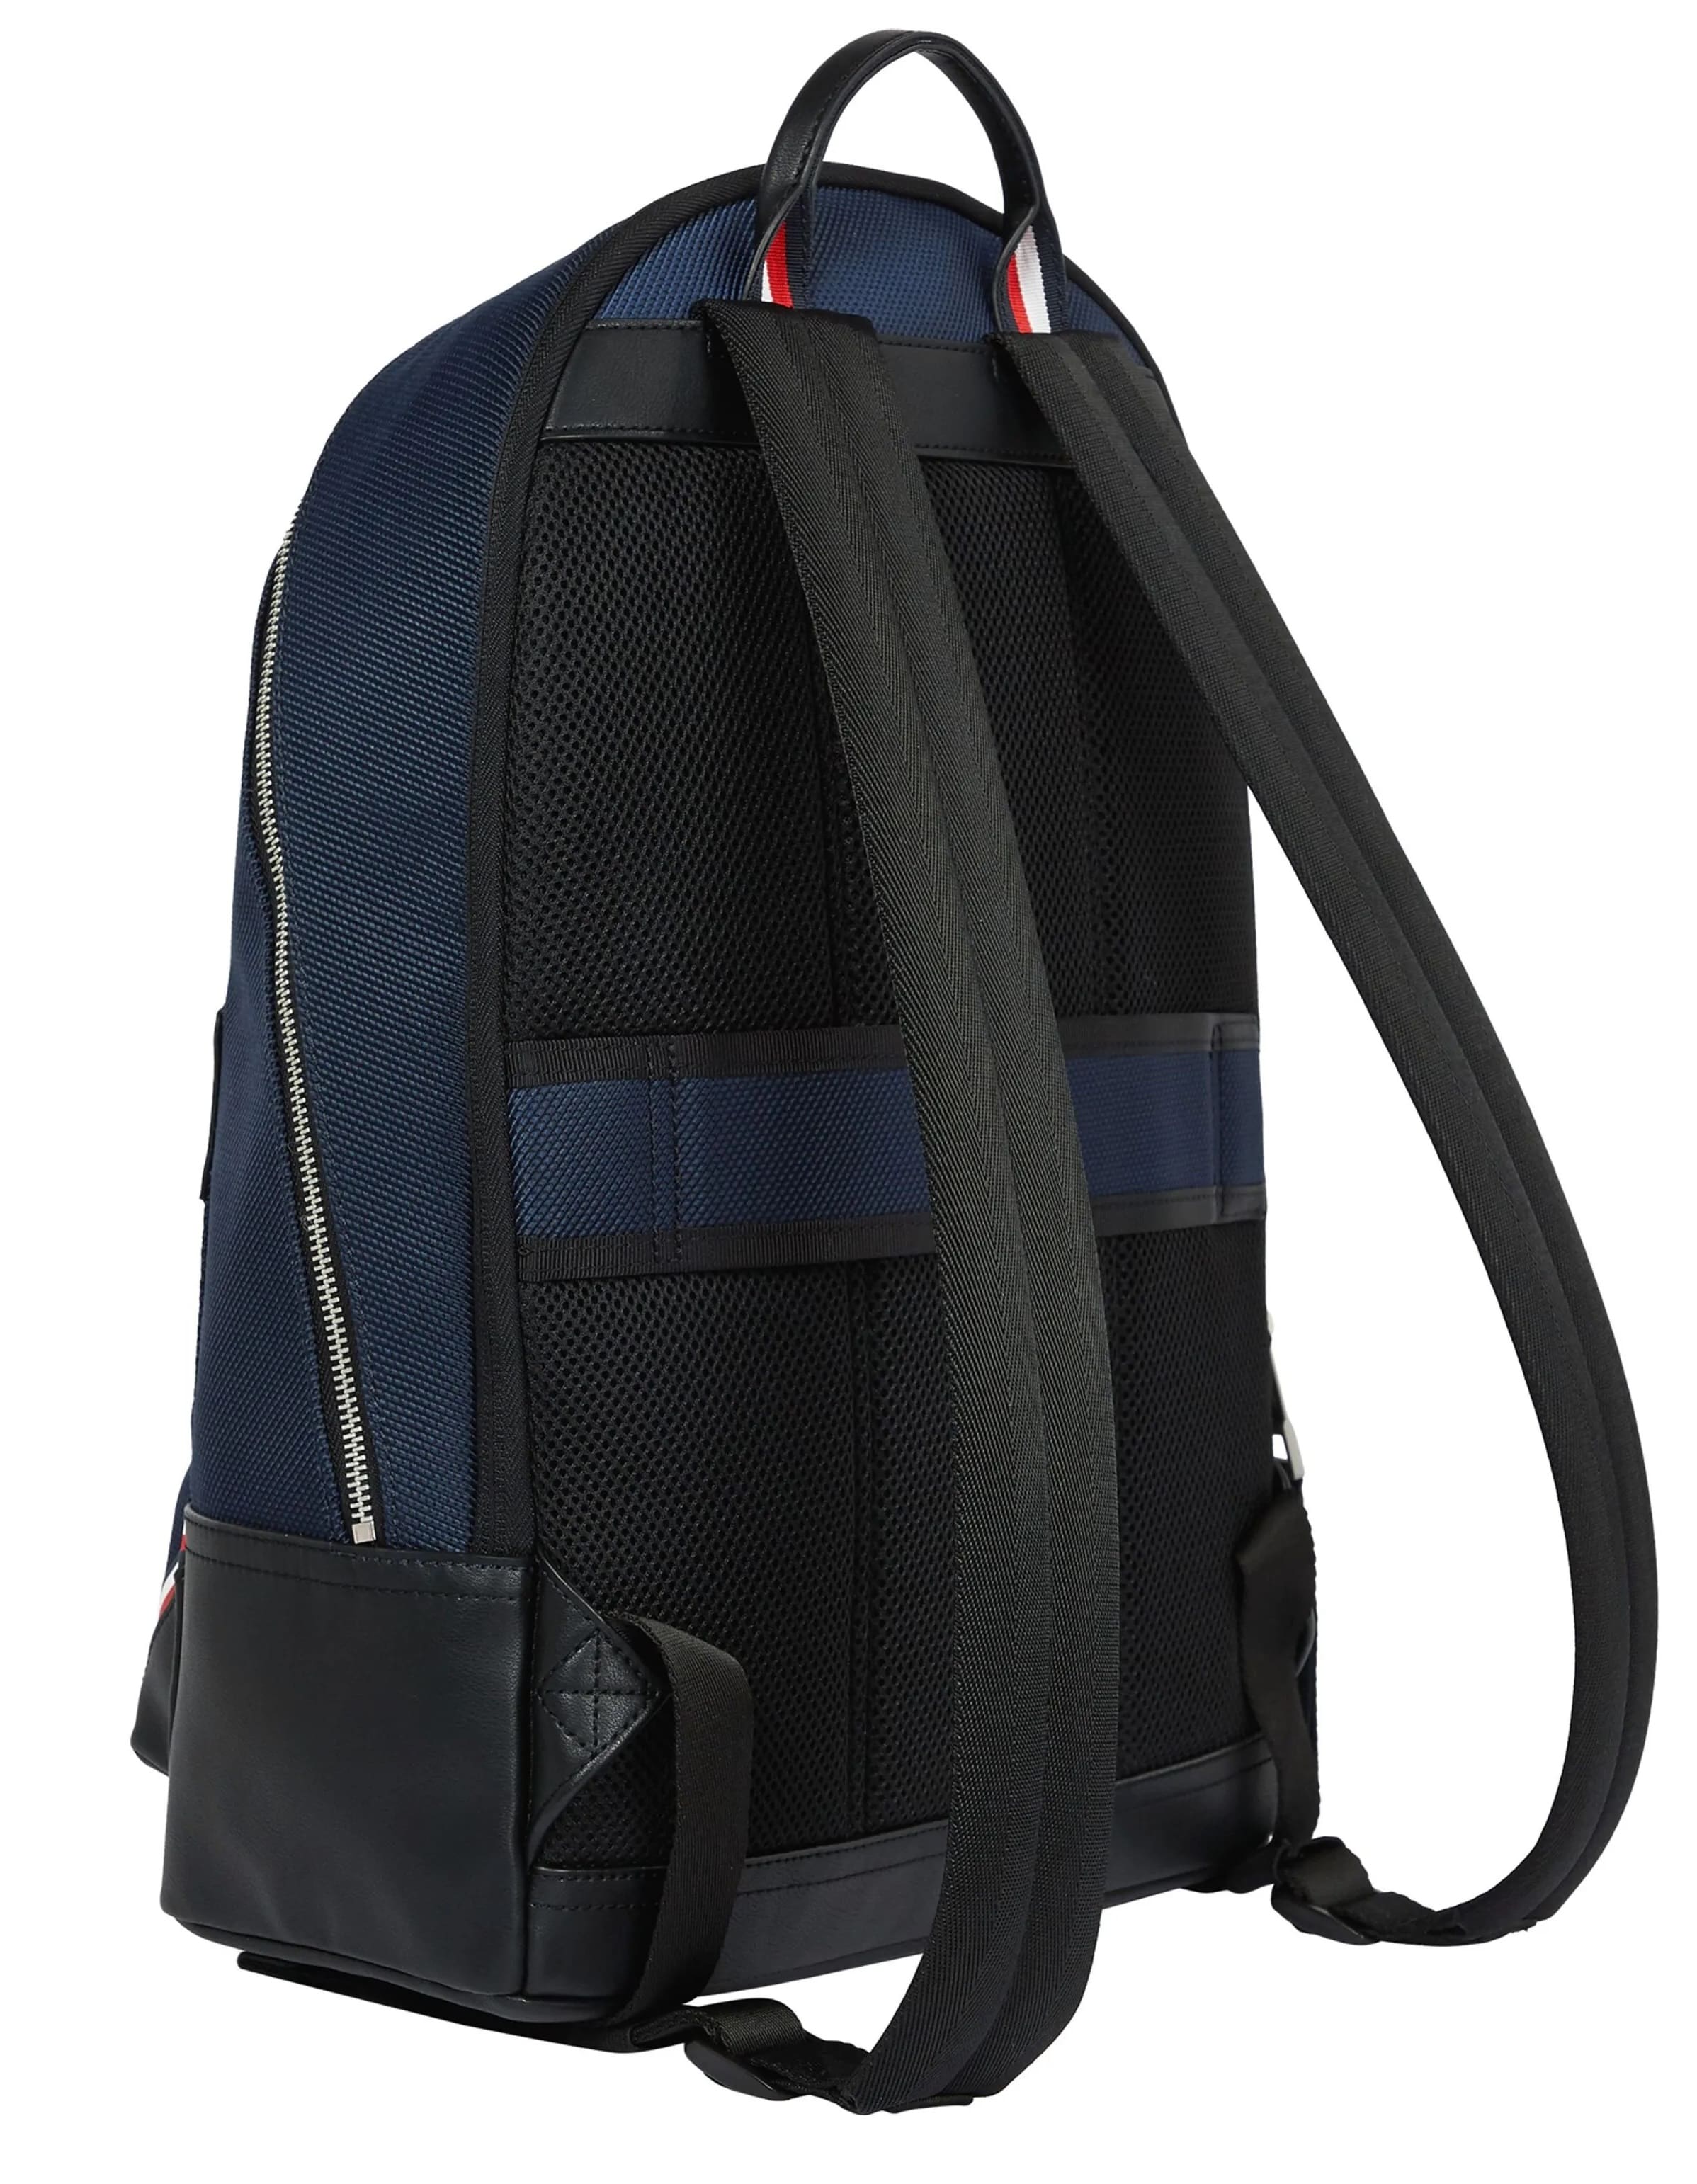 BALO TOMMY HILFIGER ESSENTIAL 1985 NYLON BACKPACK 13